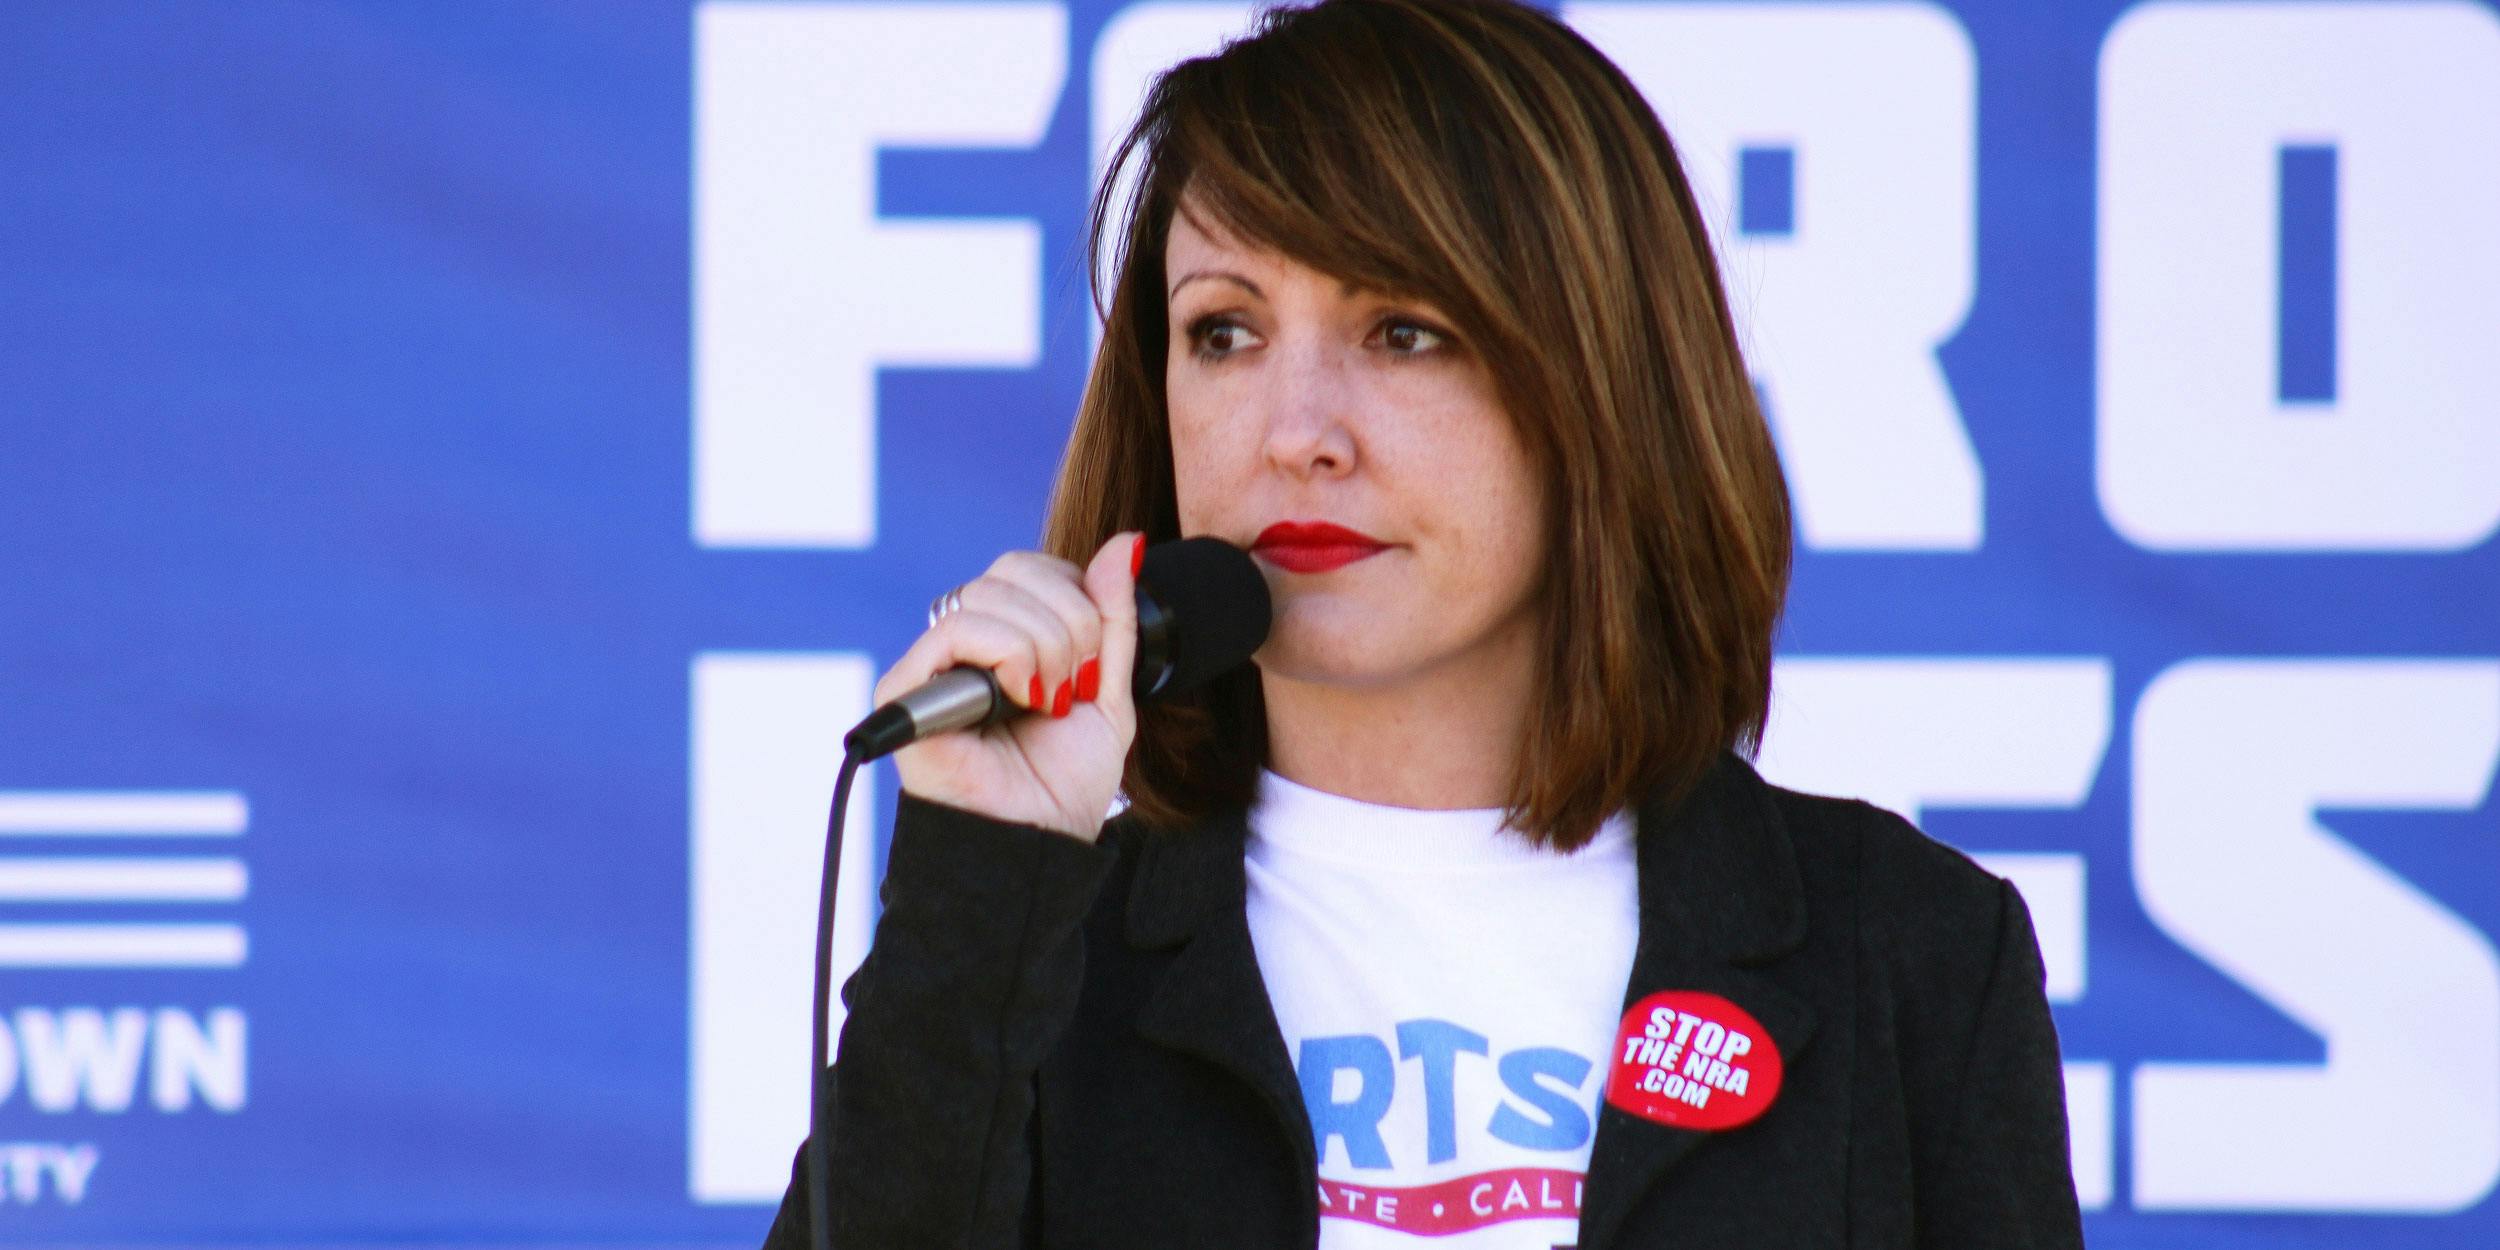 Alison Hartson speaking at the march for our lives